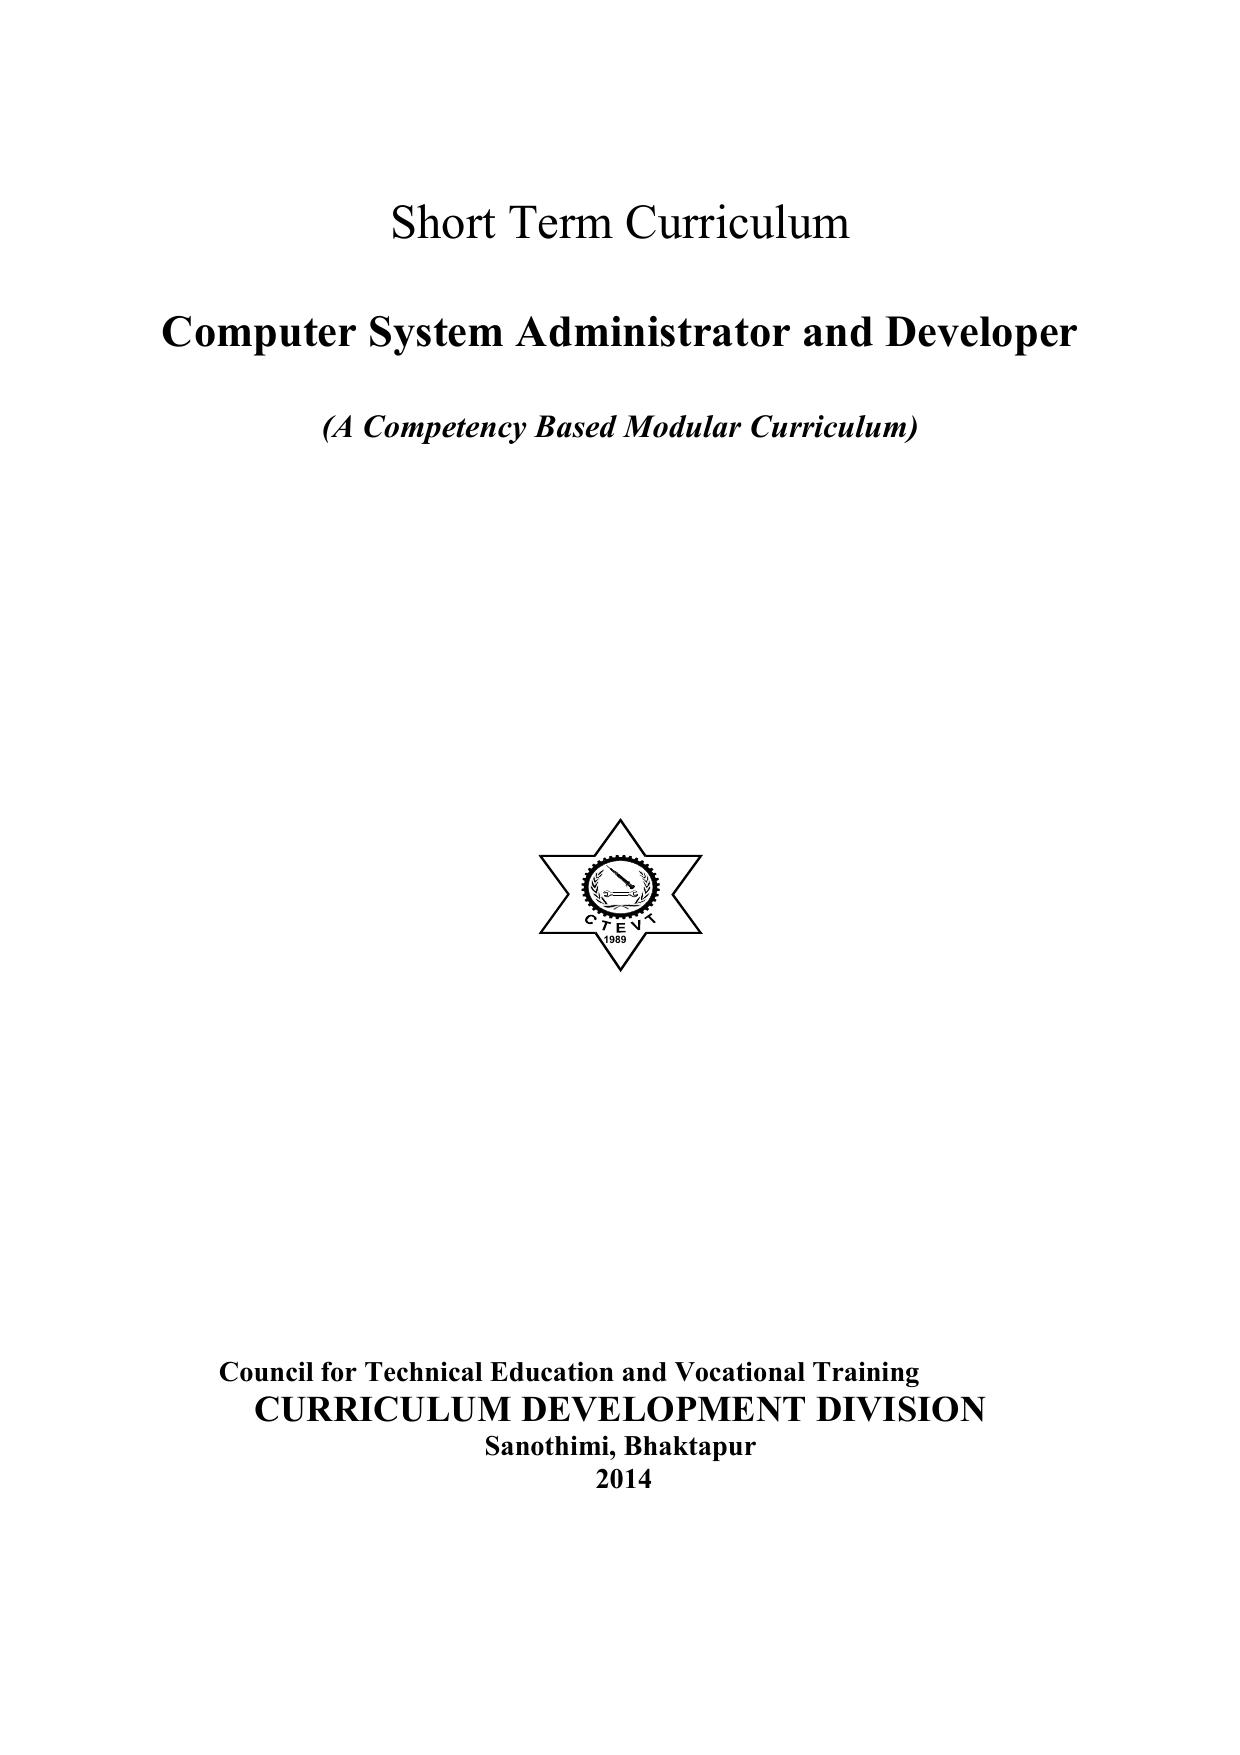 Computer System Administrator and Developer, 2014